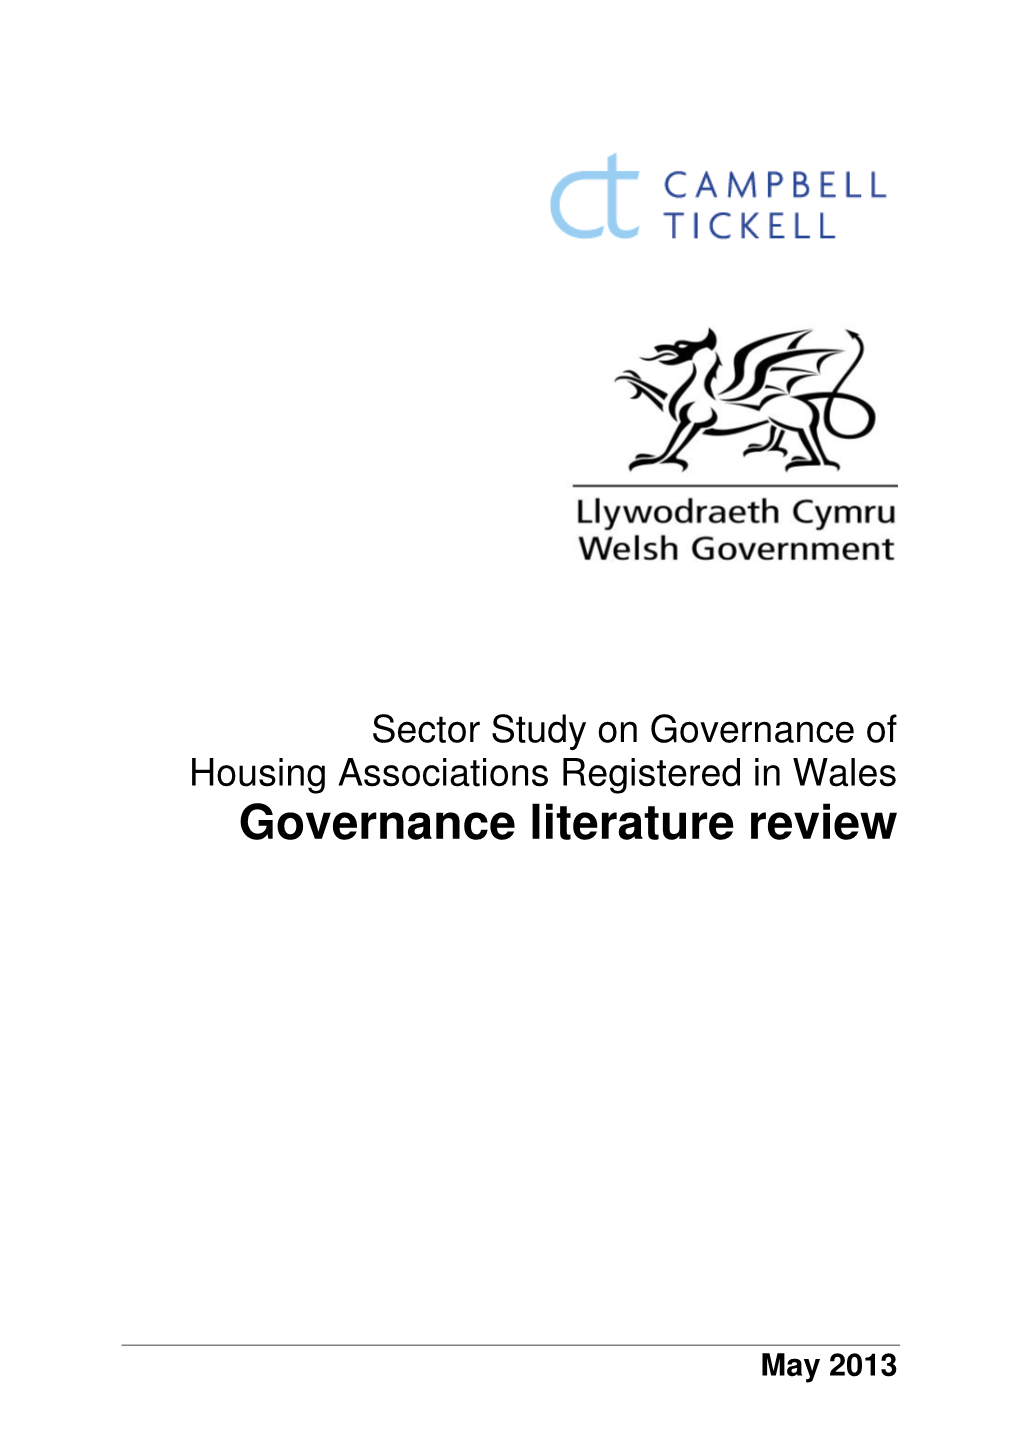 Sector Study on Governance of Housing Associations Registered in Wales Governance Literature Review